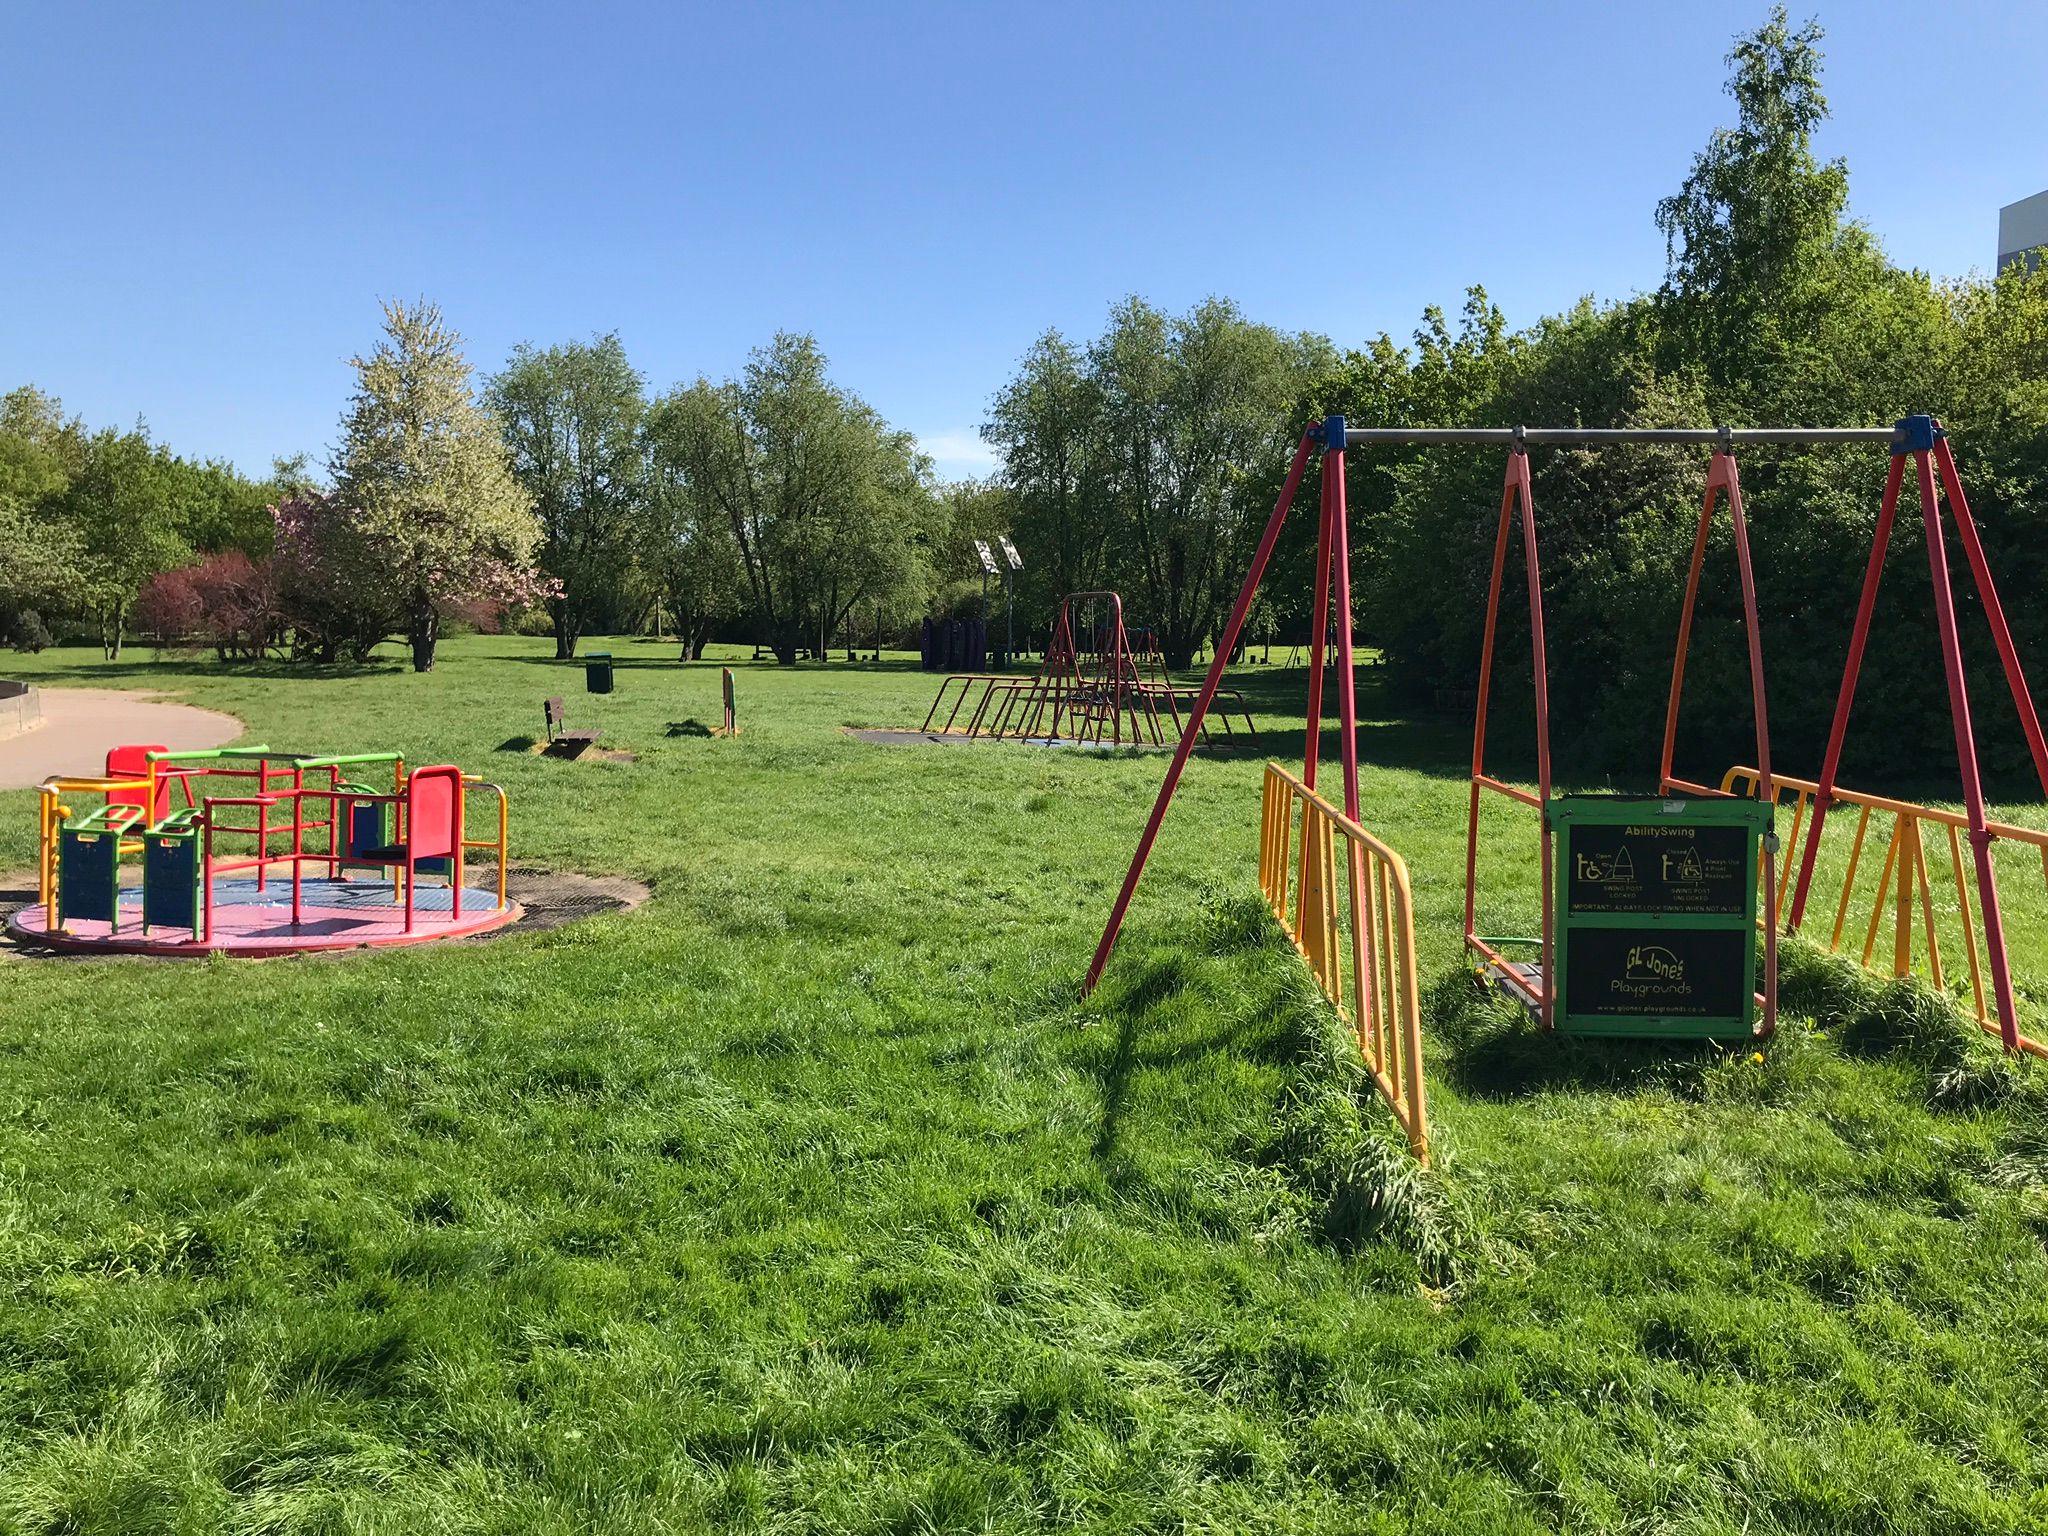 Play equipment on the grass including accessible swing and roundabout.